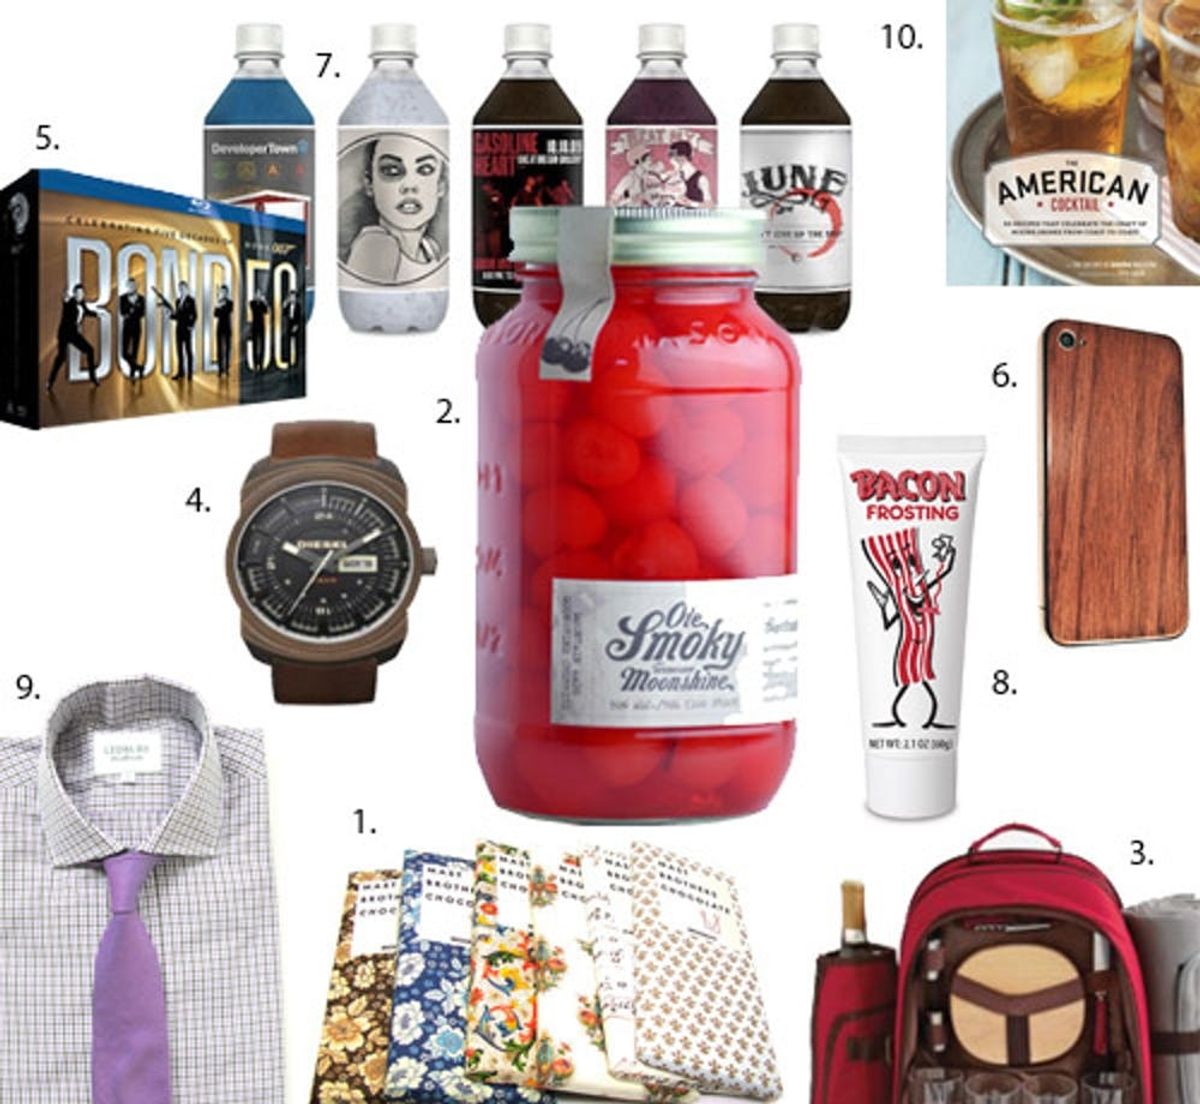 Moonshine Cherries & Bacon Frosting: 10 Valentine’s Gifts For Dudes